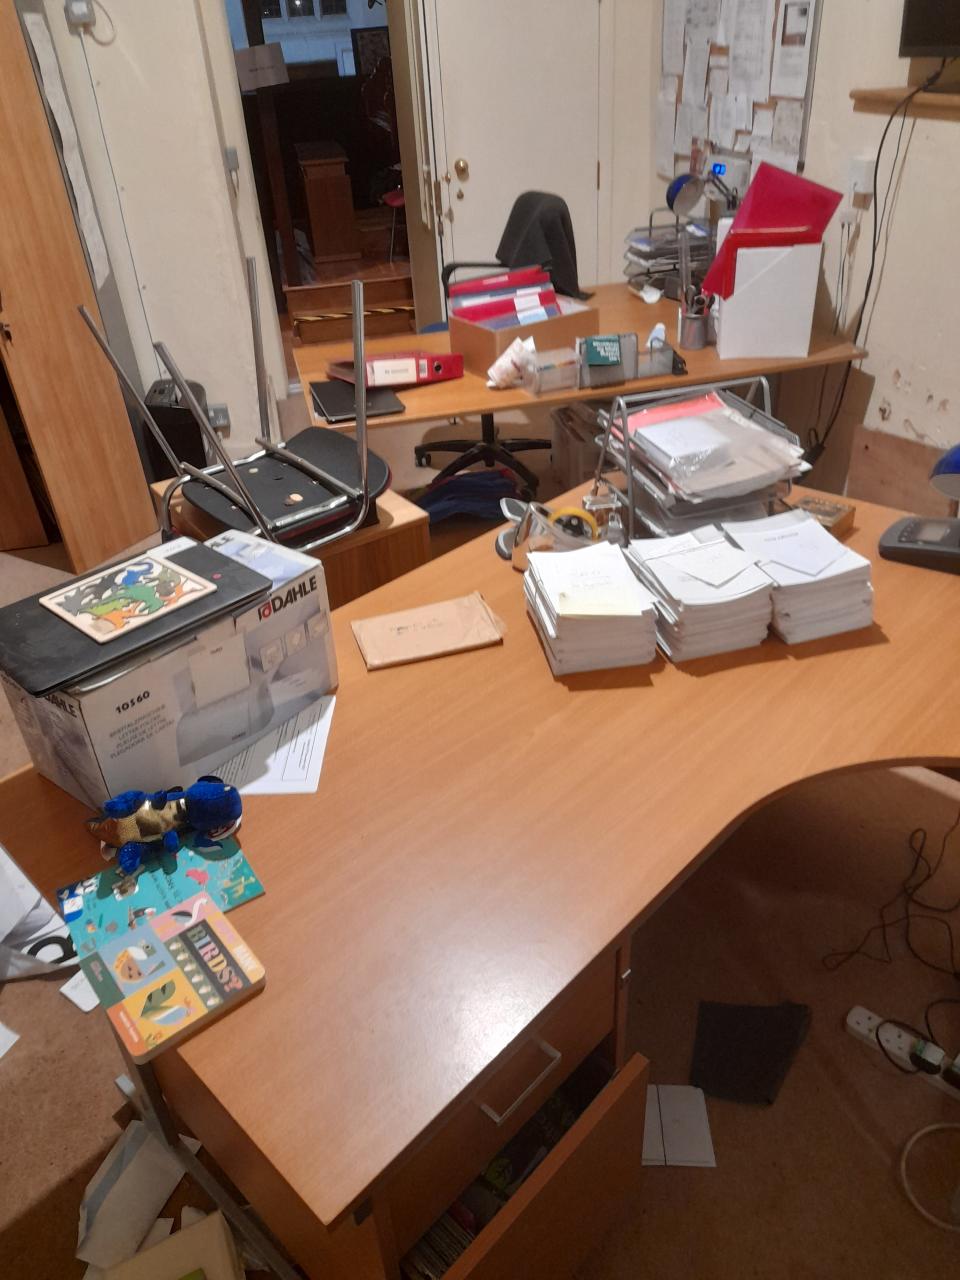 The thieves ransacked the office of Christ Church in Wanstead and stole a safe. (Wanstead Parish)